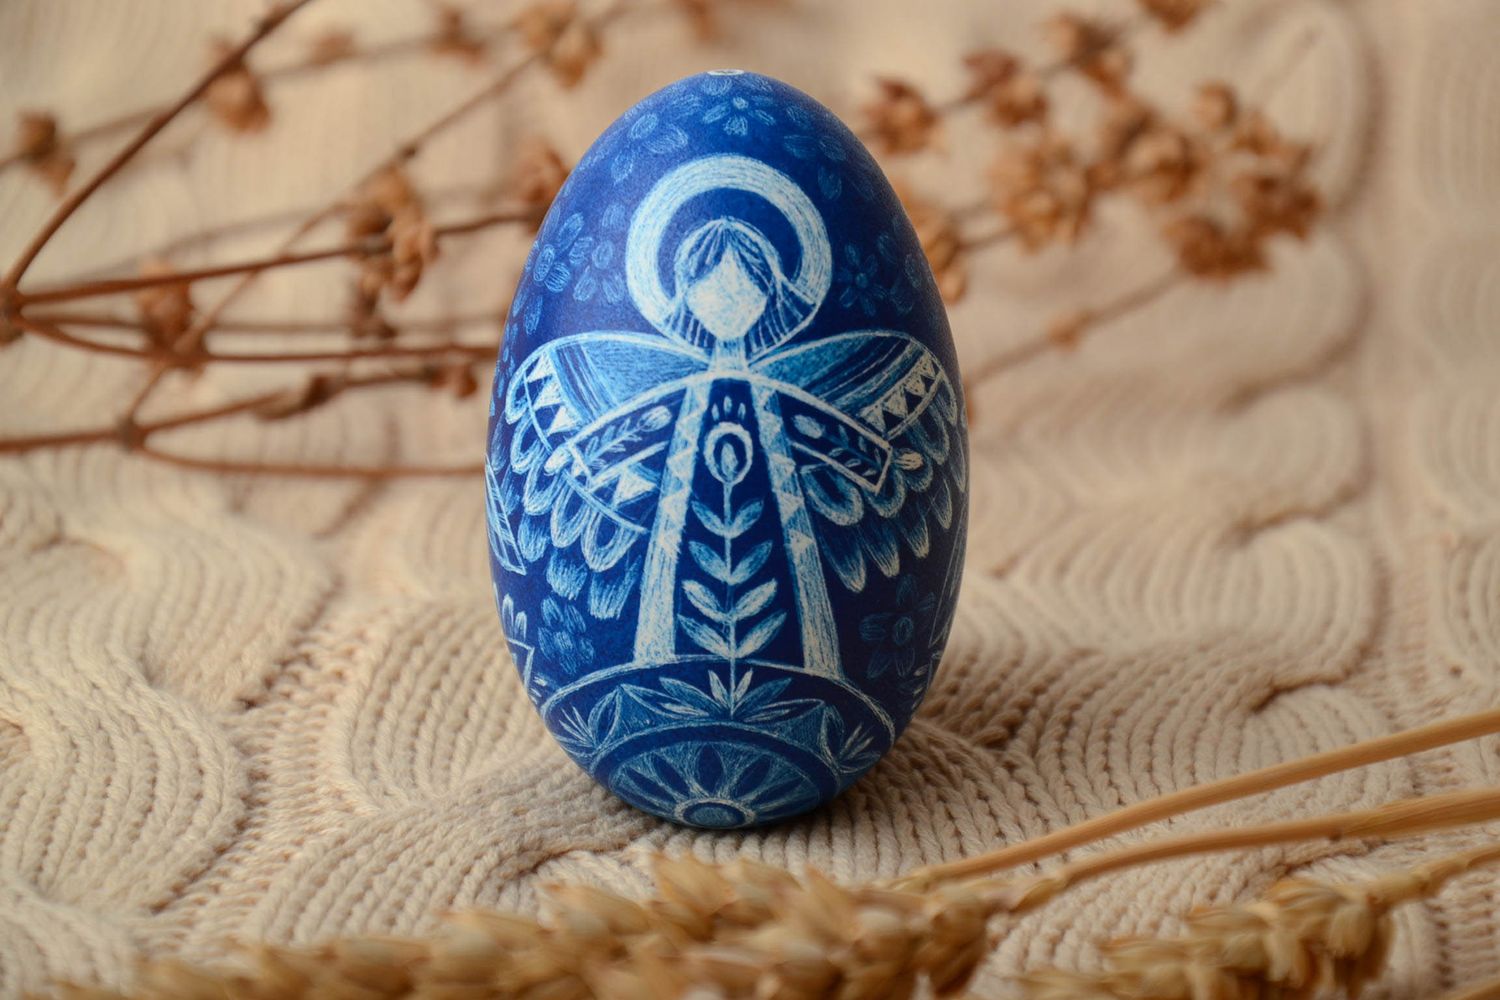 Painted goose egg for Easter decor photo 1